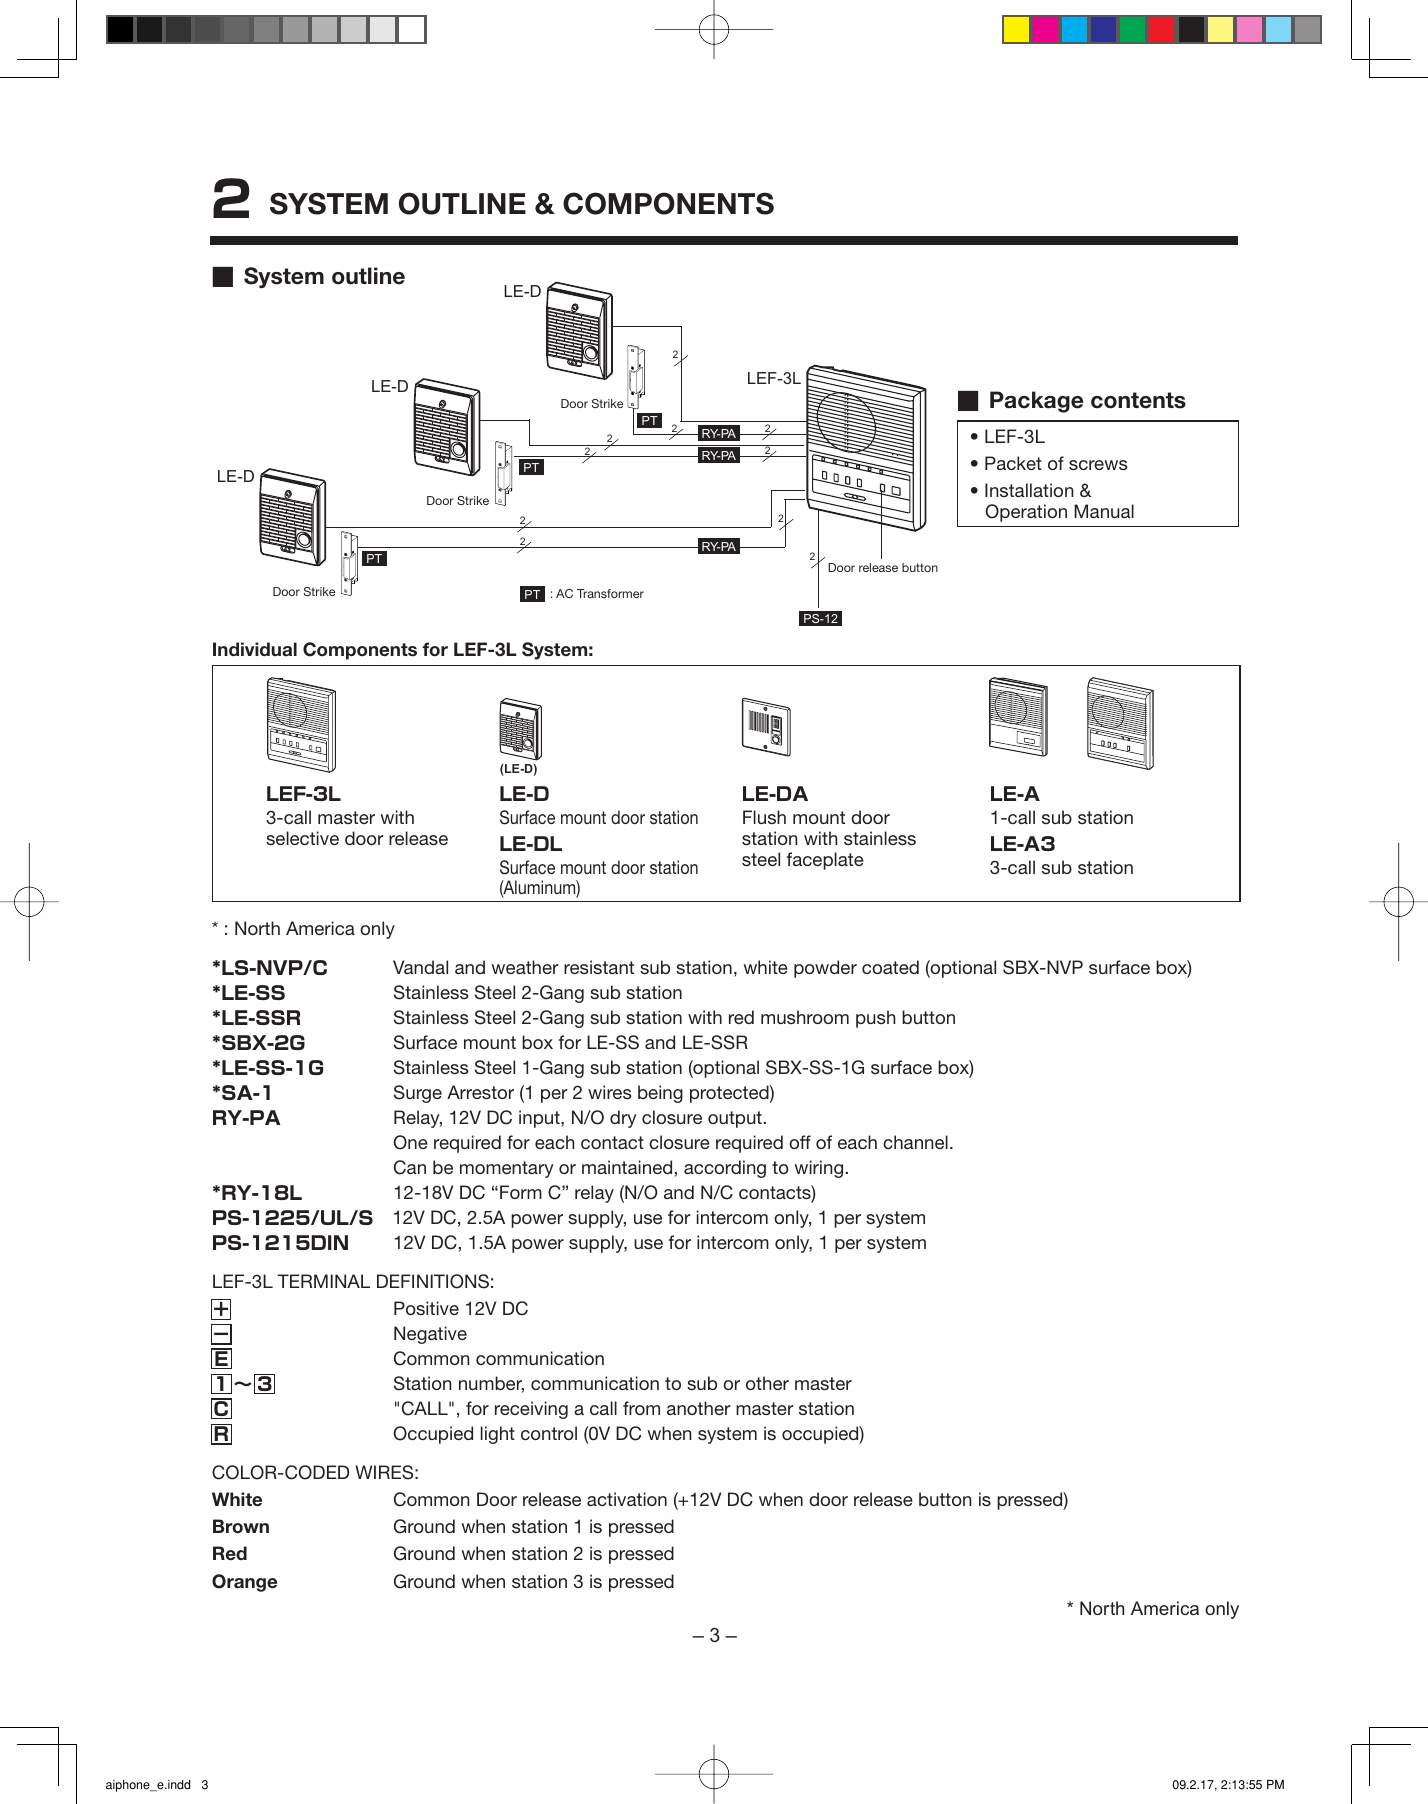 Page 3 of 12 - Aiphone Aiphone-Lef-3L-Users-Manual- Aiphone_e  Aiphone-lef-3l-users-manual